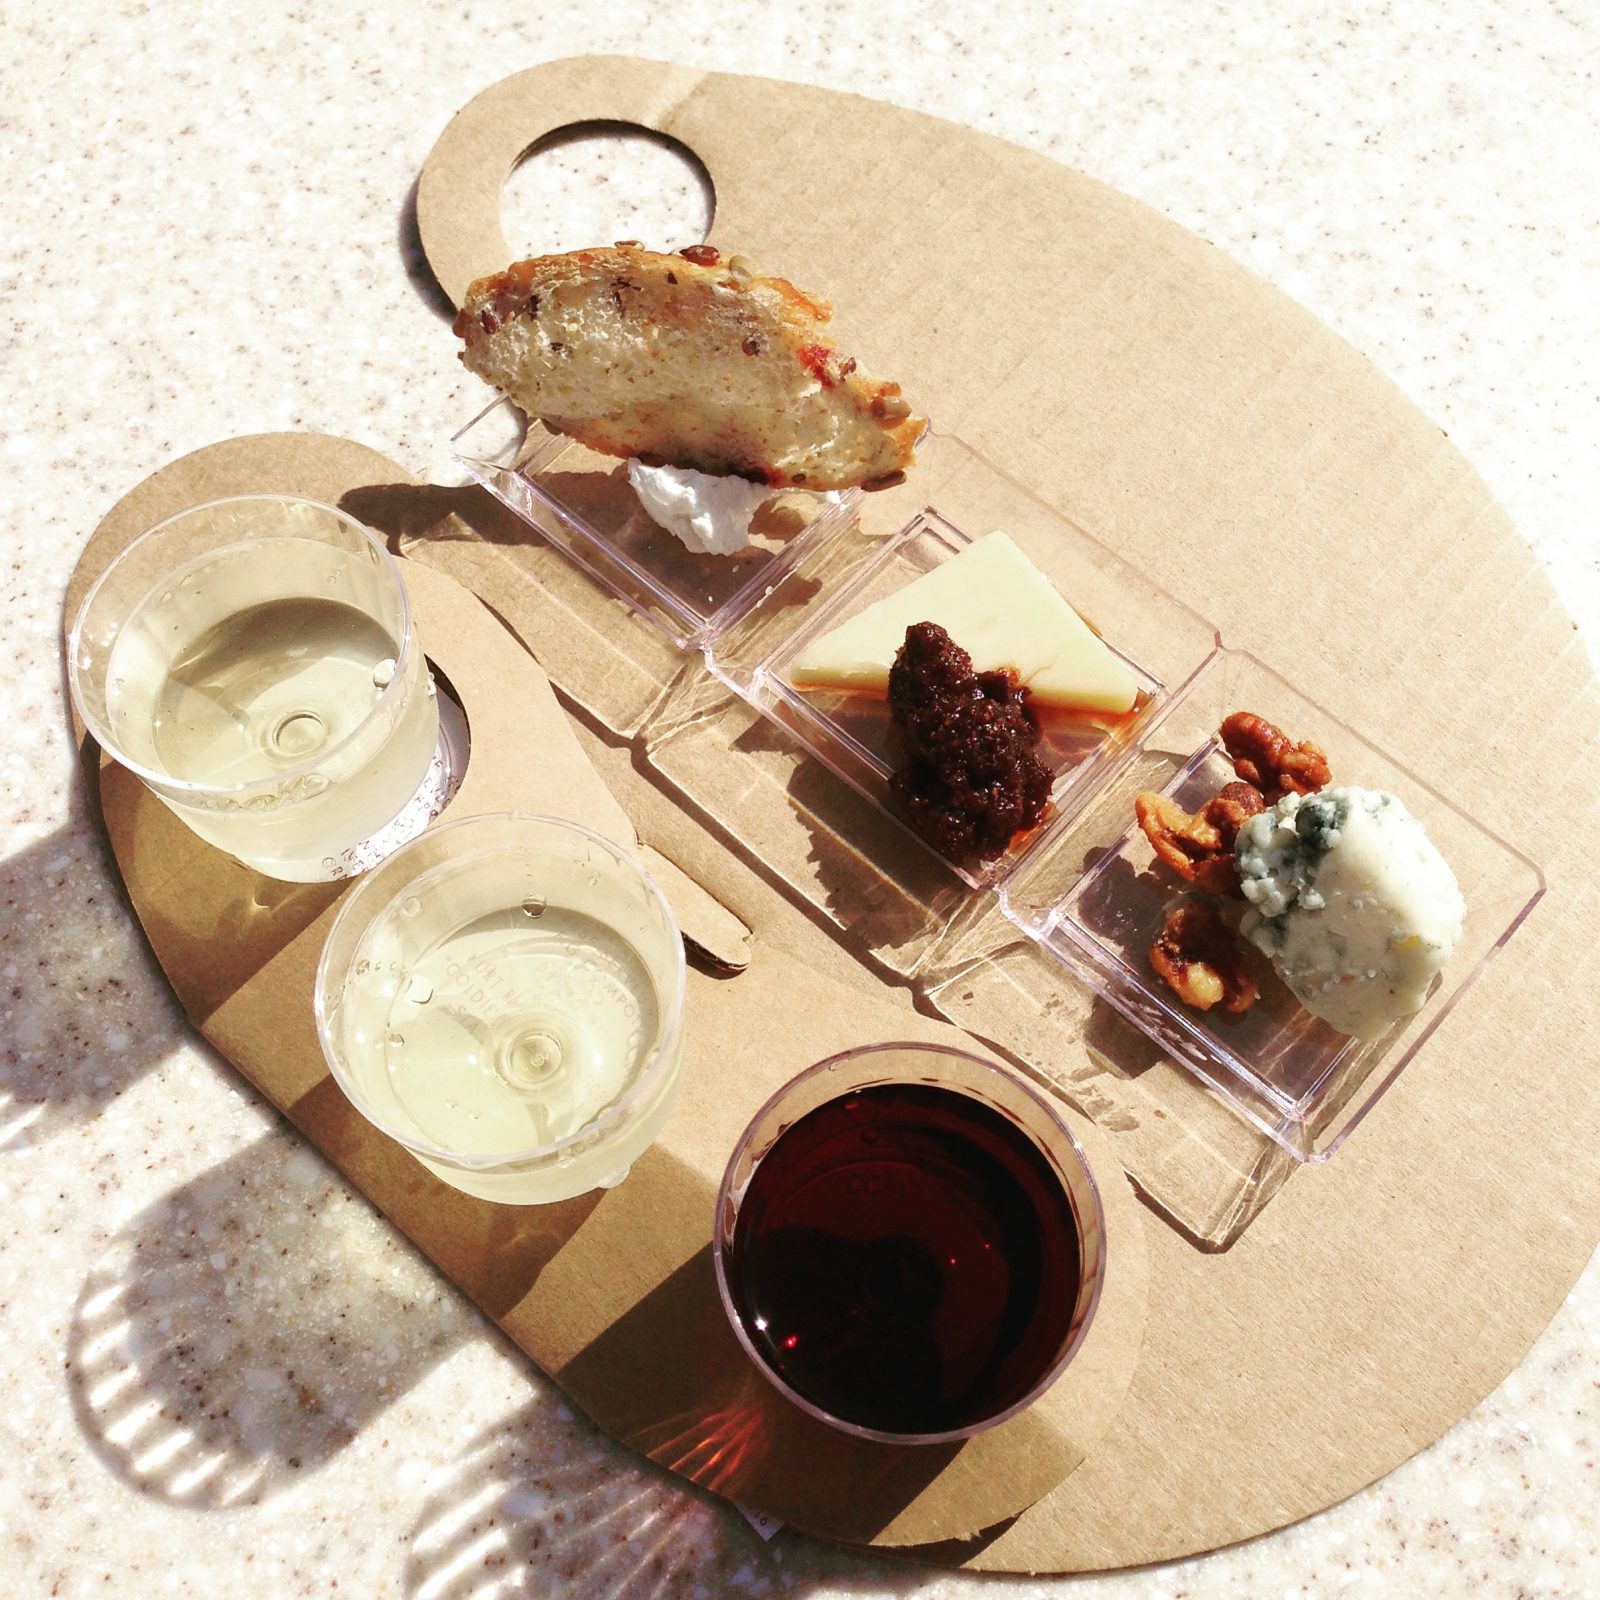 wine and food samples